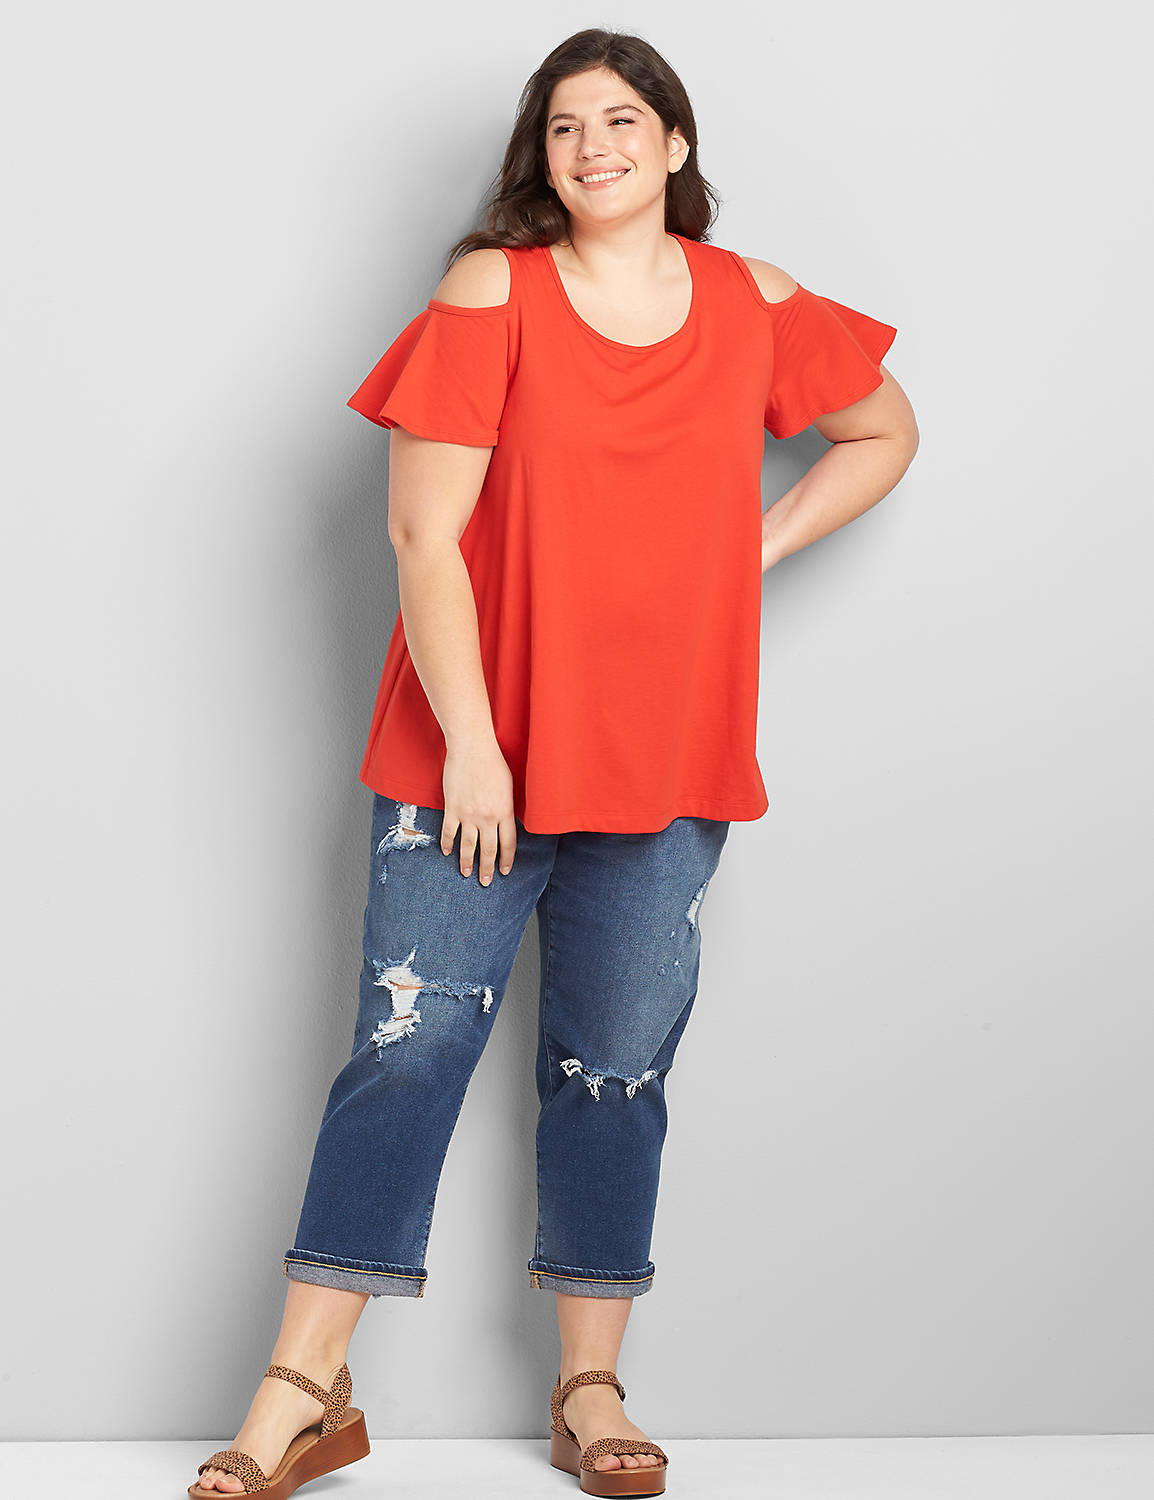 Cold-Shoulder Swing Tee Product Image 3